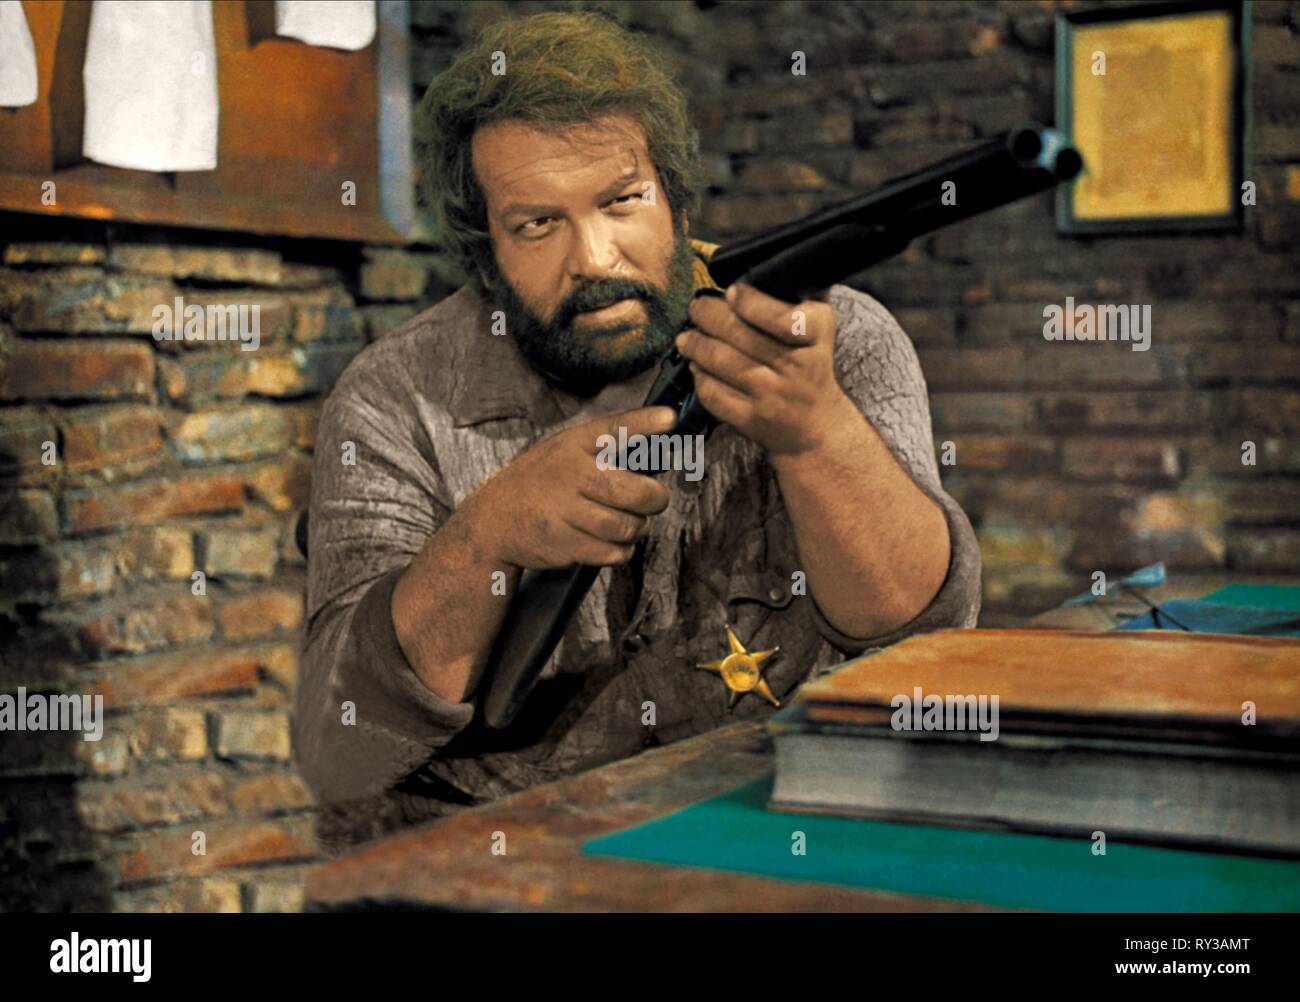 Bud Spencer und Terence Hill Filme: 10 Highlights mit dem Duo